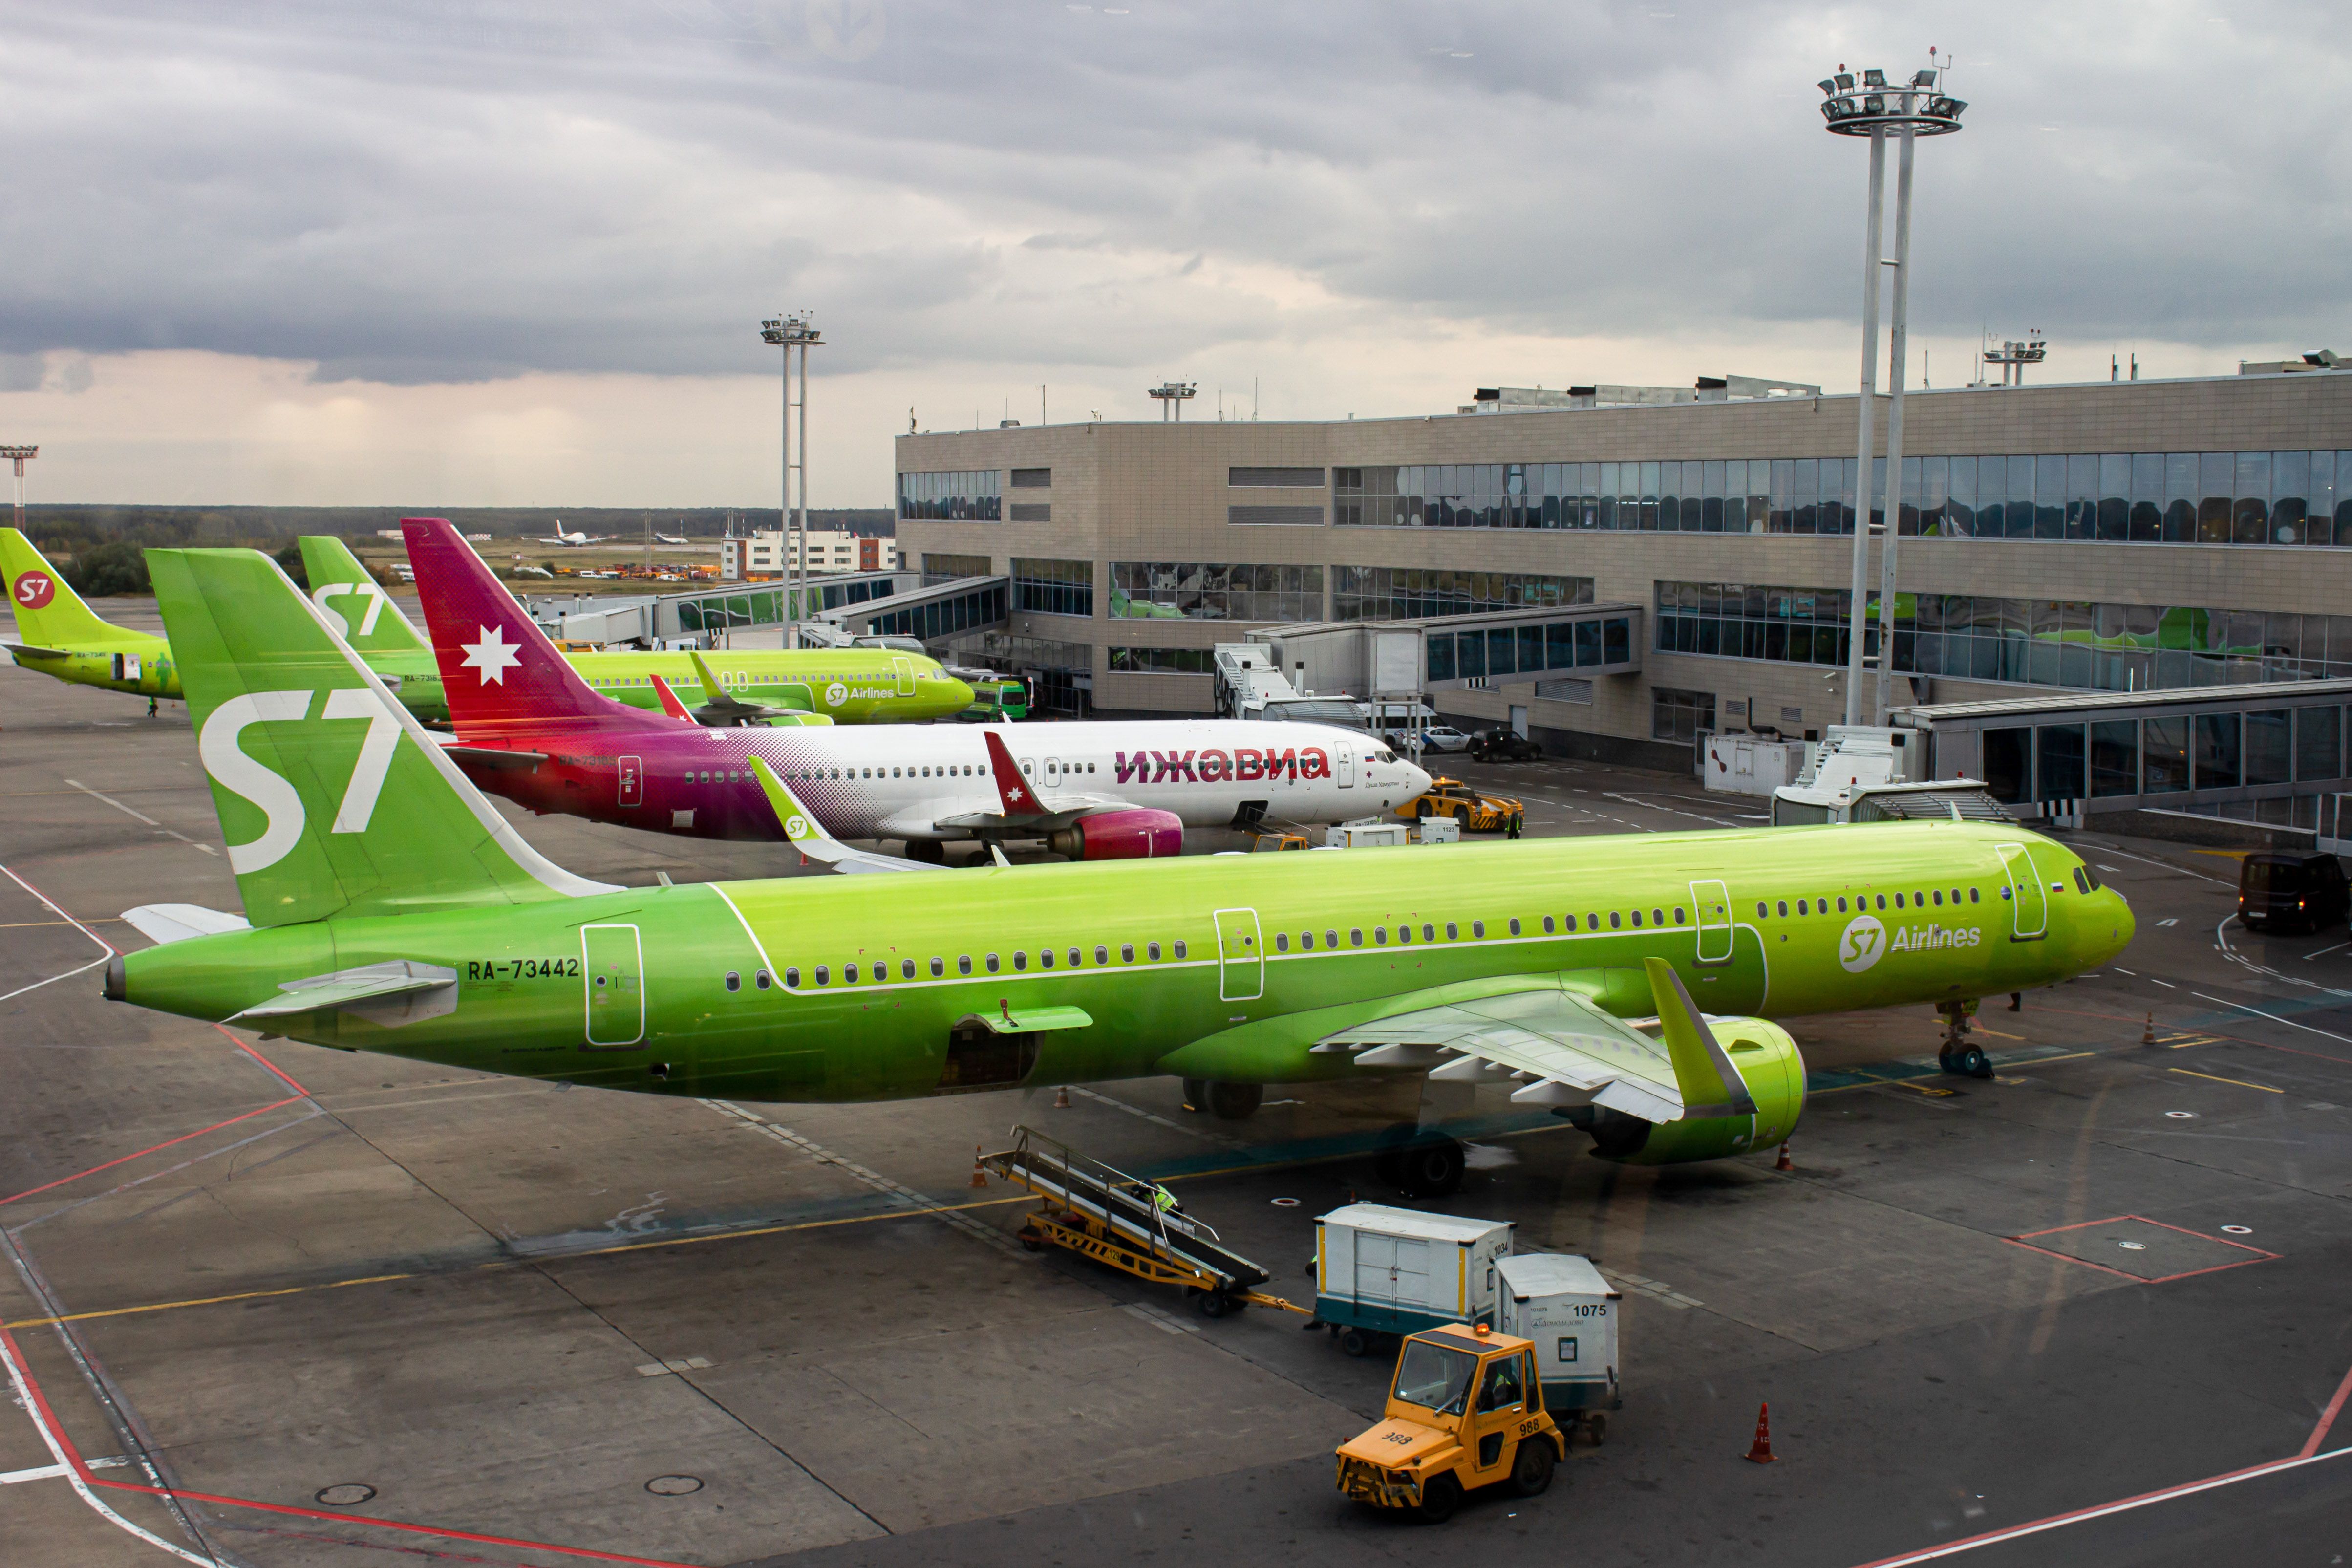 Aircraft from S7 Airlines and Izhavia Airlines are seen at the Domodedovo airport in Moscow